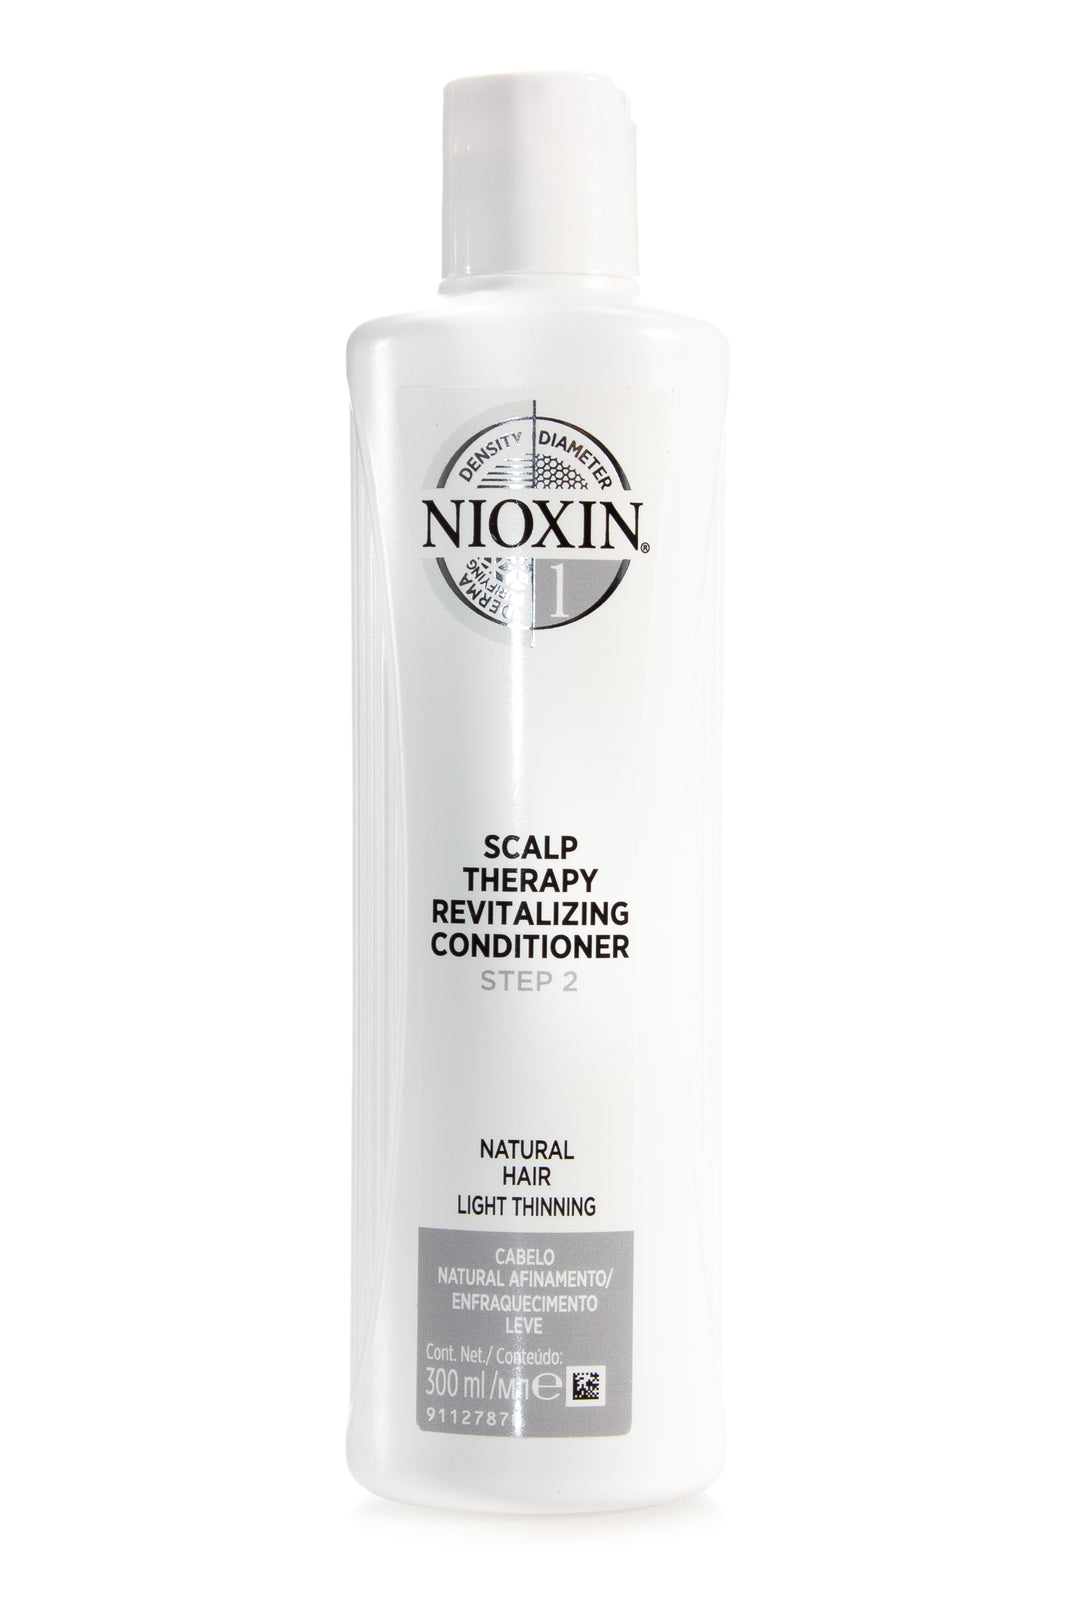 nioxin-system-1-scalp-therapy-revitalizing-conditioner-300ml